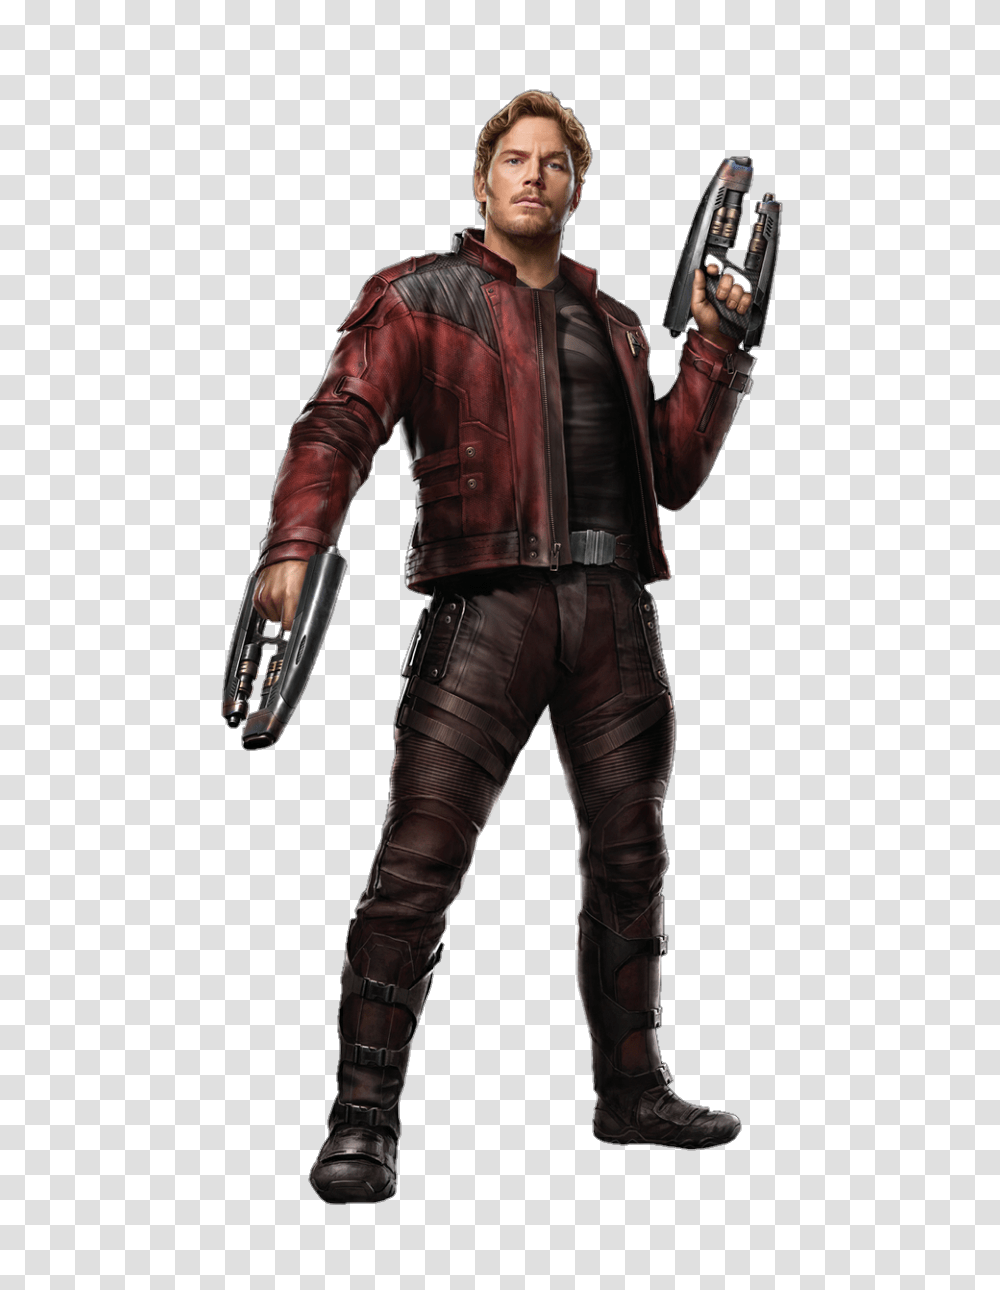 Avengers Infinity War & Clipart Free Star Lord Infinity War, Clothing, Person, Jacket, Coat Transparent Png